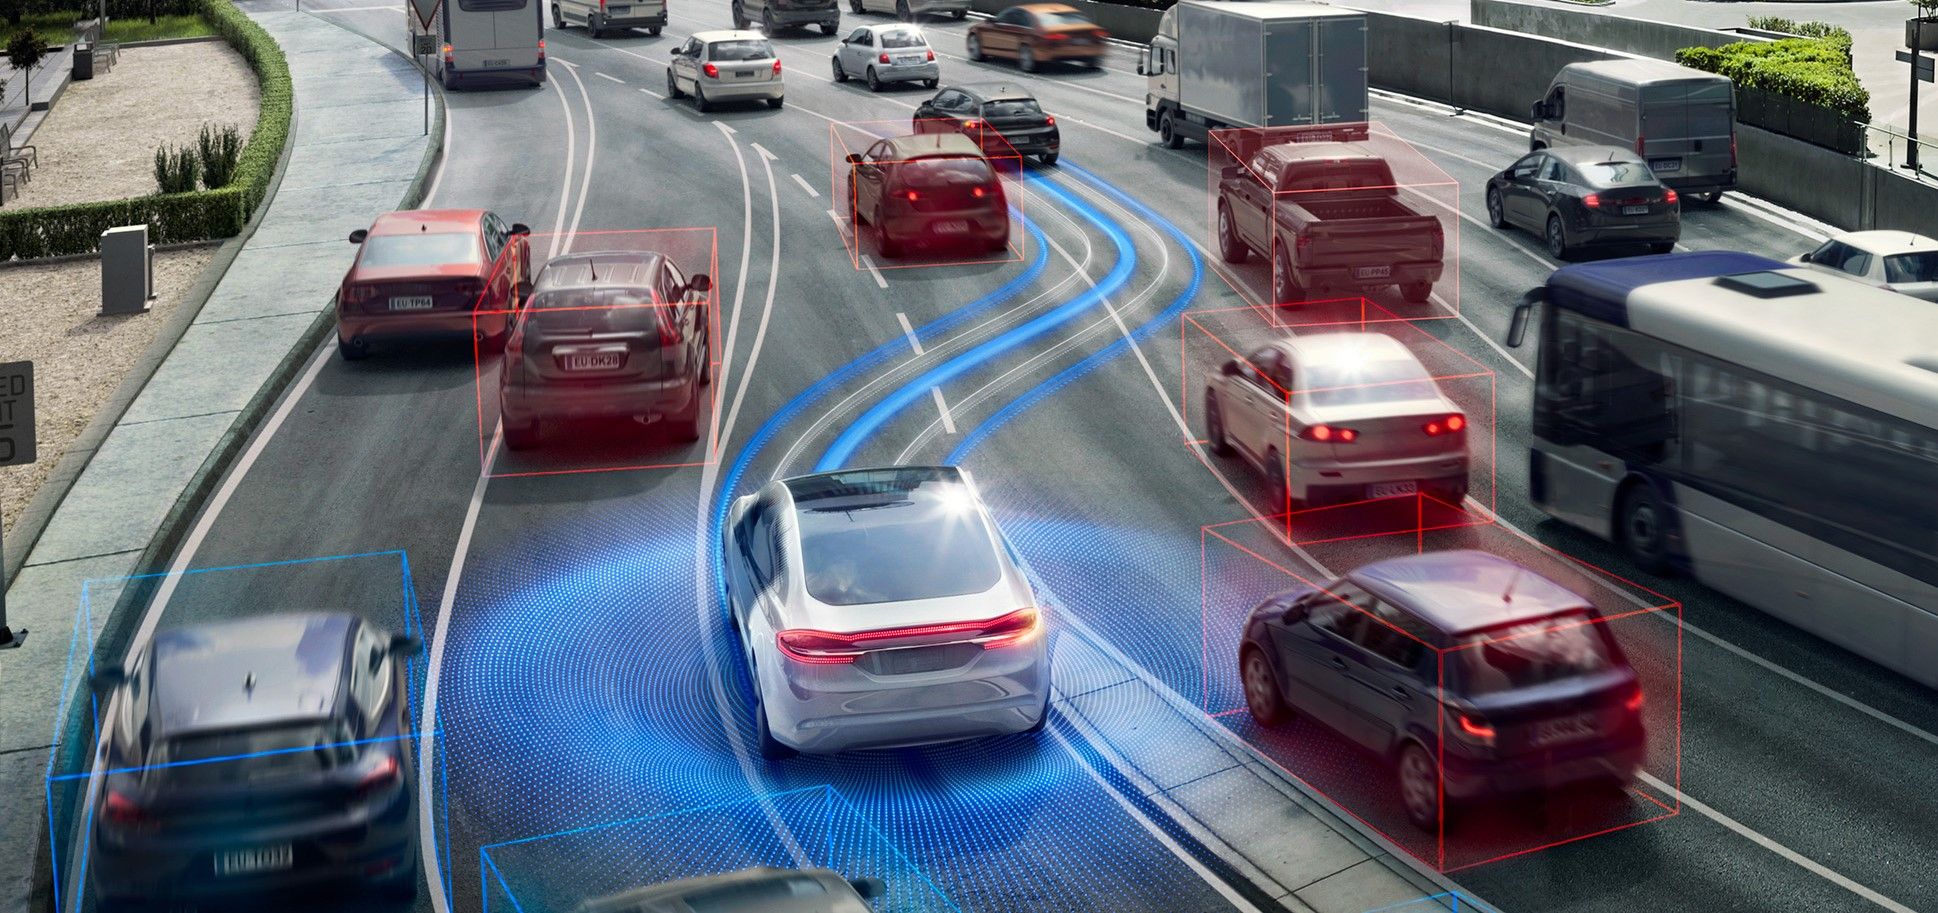 A vehicle equipped with Mobileye self-driving technology autonomously changing lanes in heavy traffic on the highway